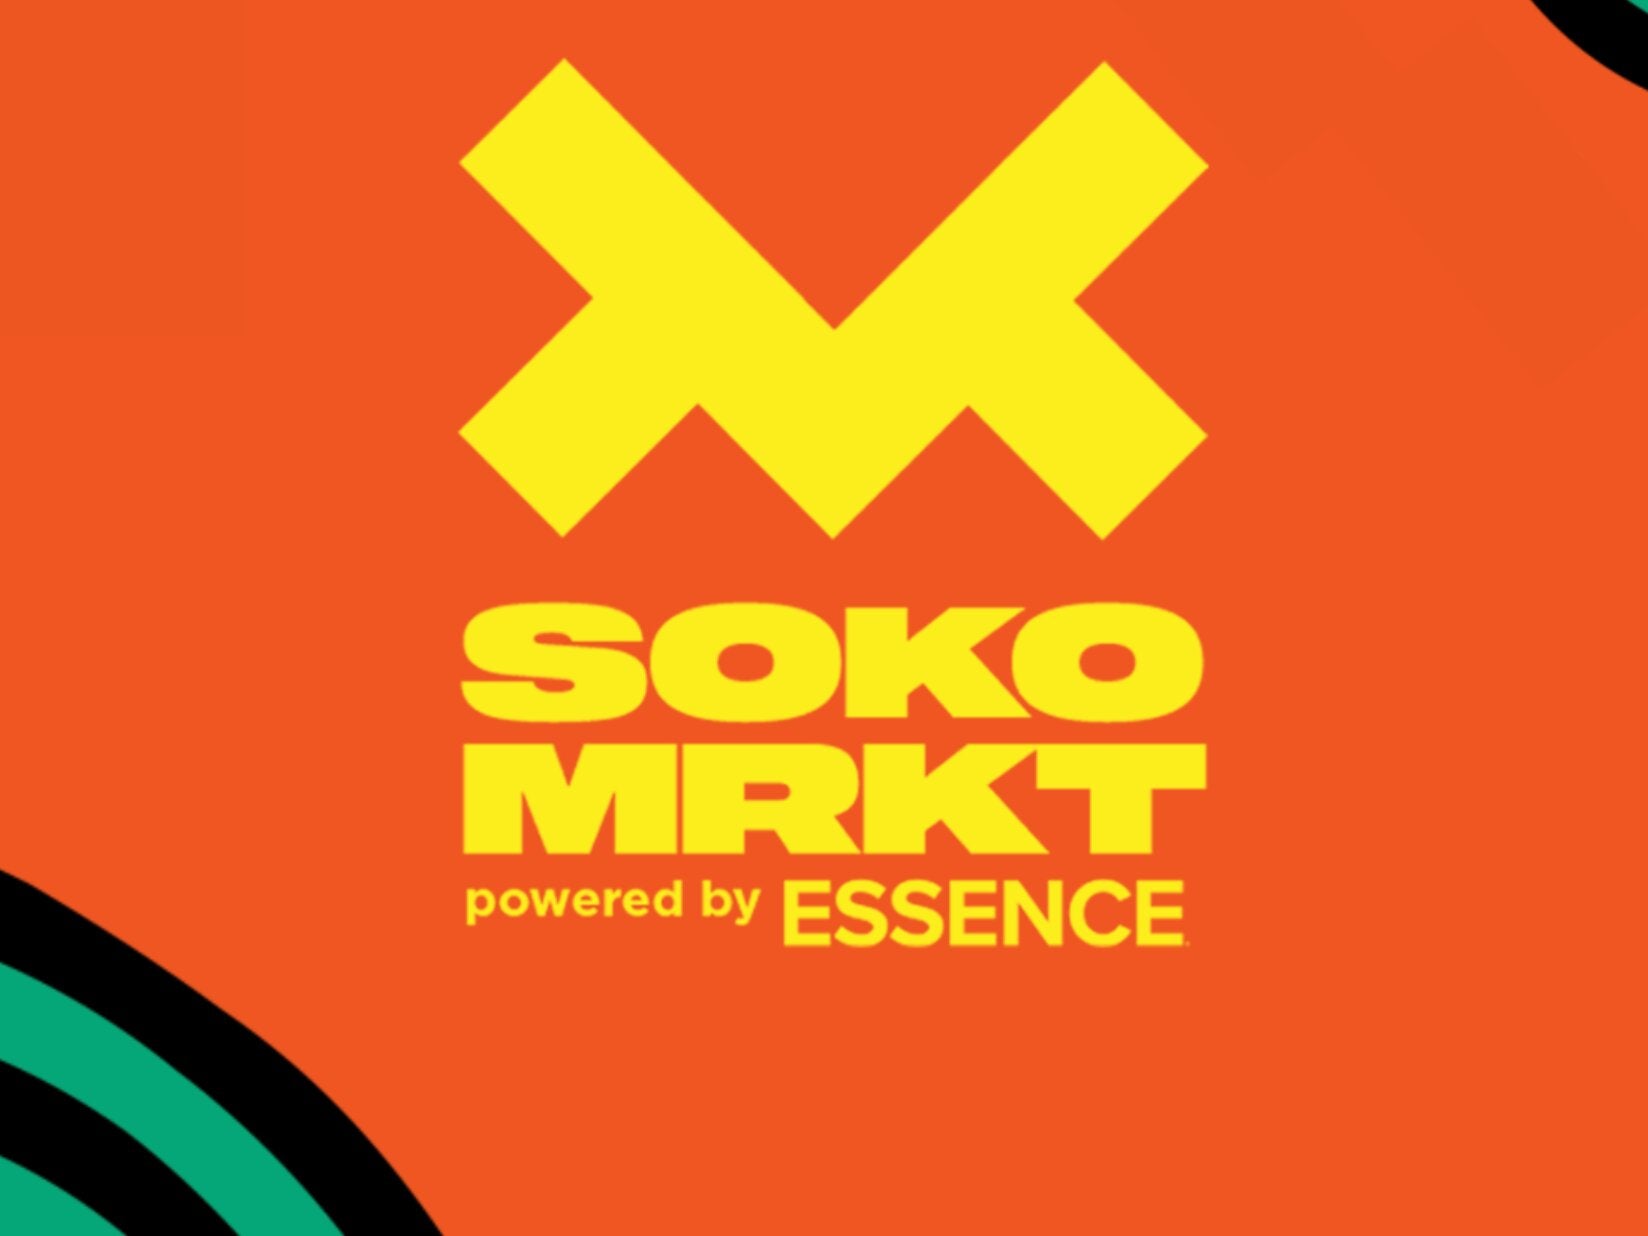 Here’s What To Expect At The Essence Festival Soko Mrkt Stage